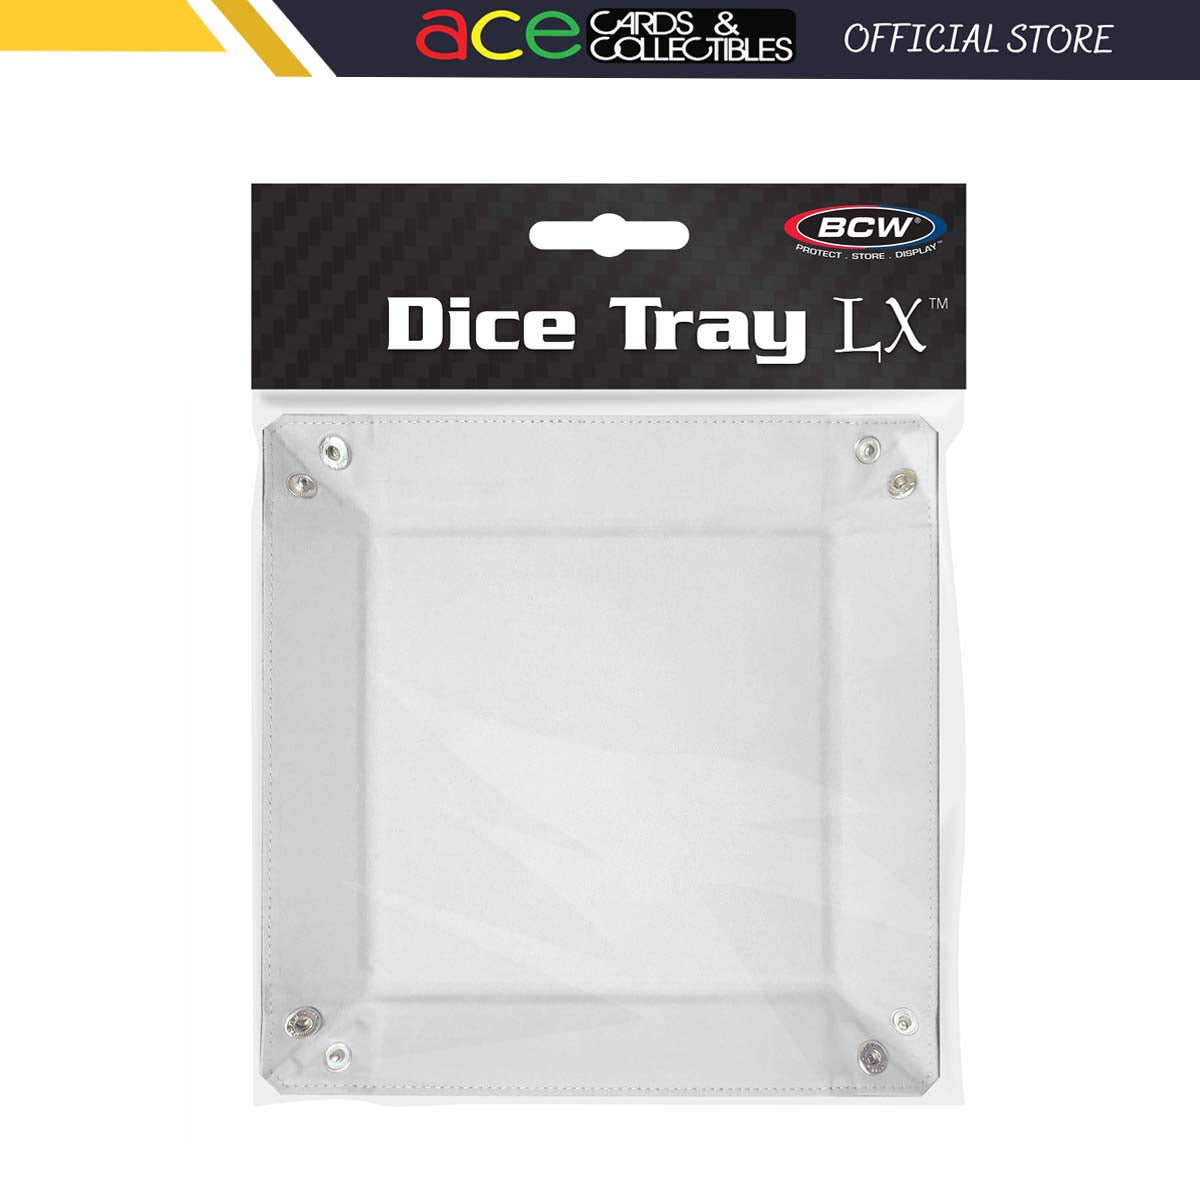 BCW Rectangular Dice Tray "White"-BCW Supplies-Ace Cards & Collectibles